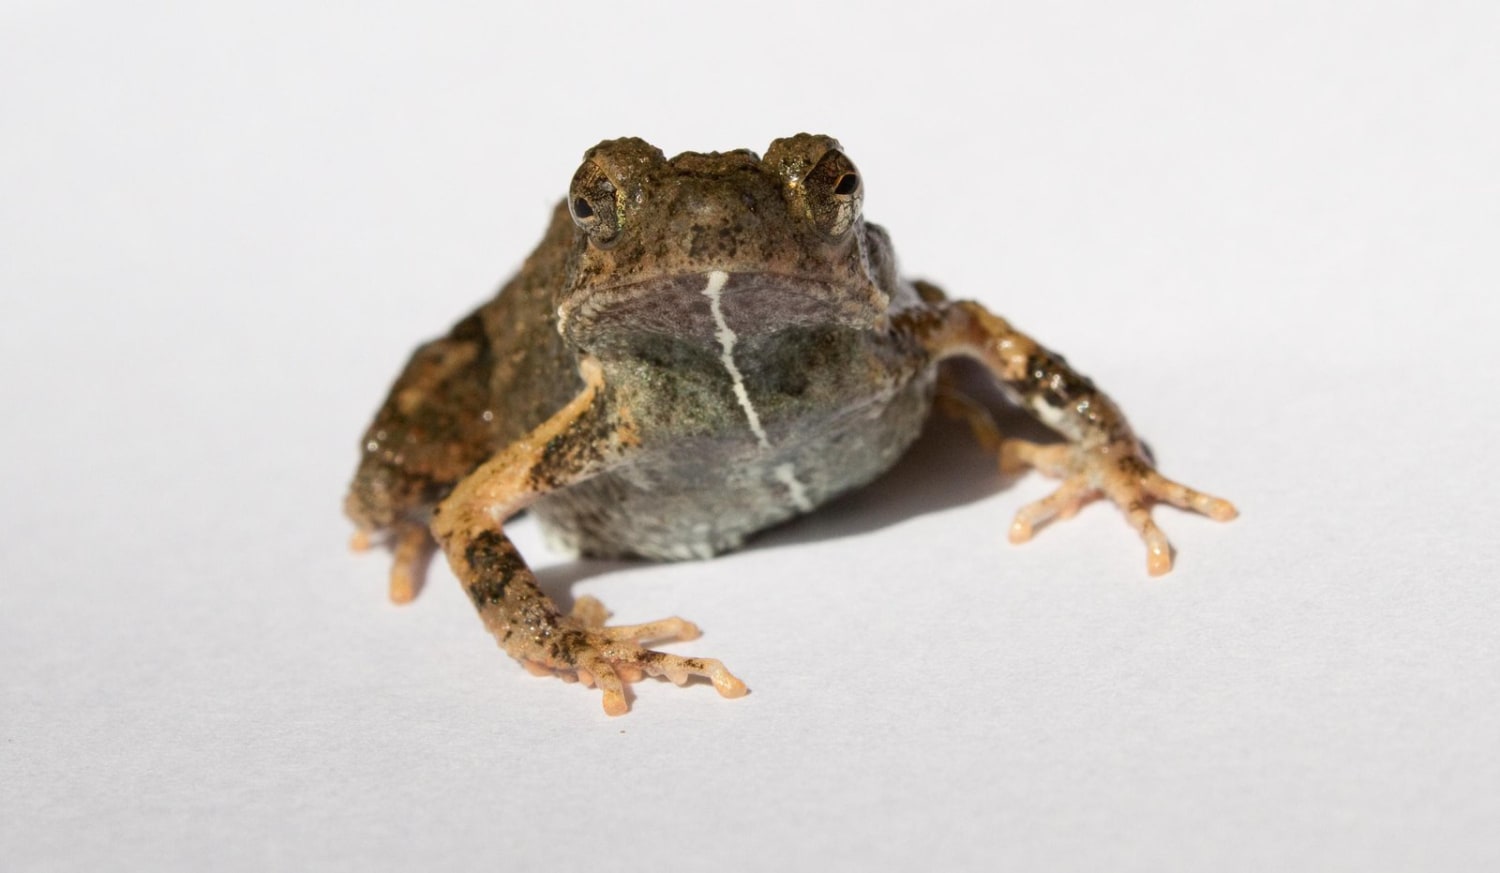 A City Frog's Love Song Attracts More Mates Than Countryside Croaks